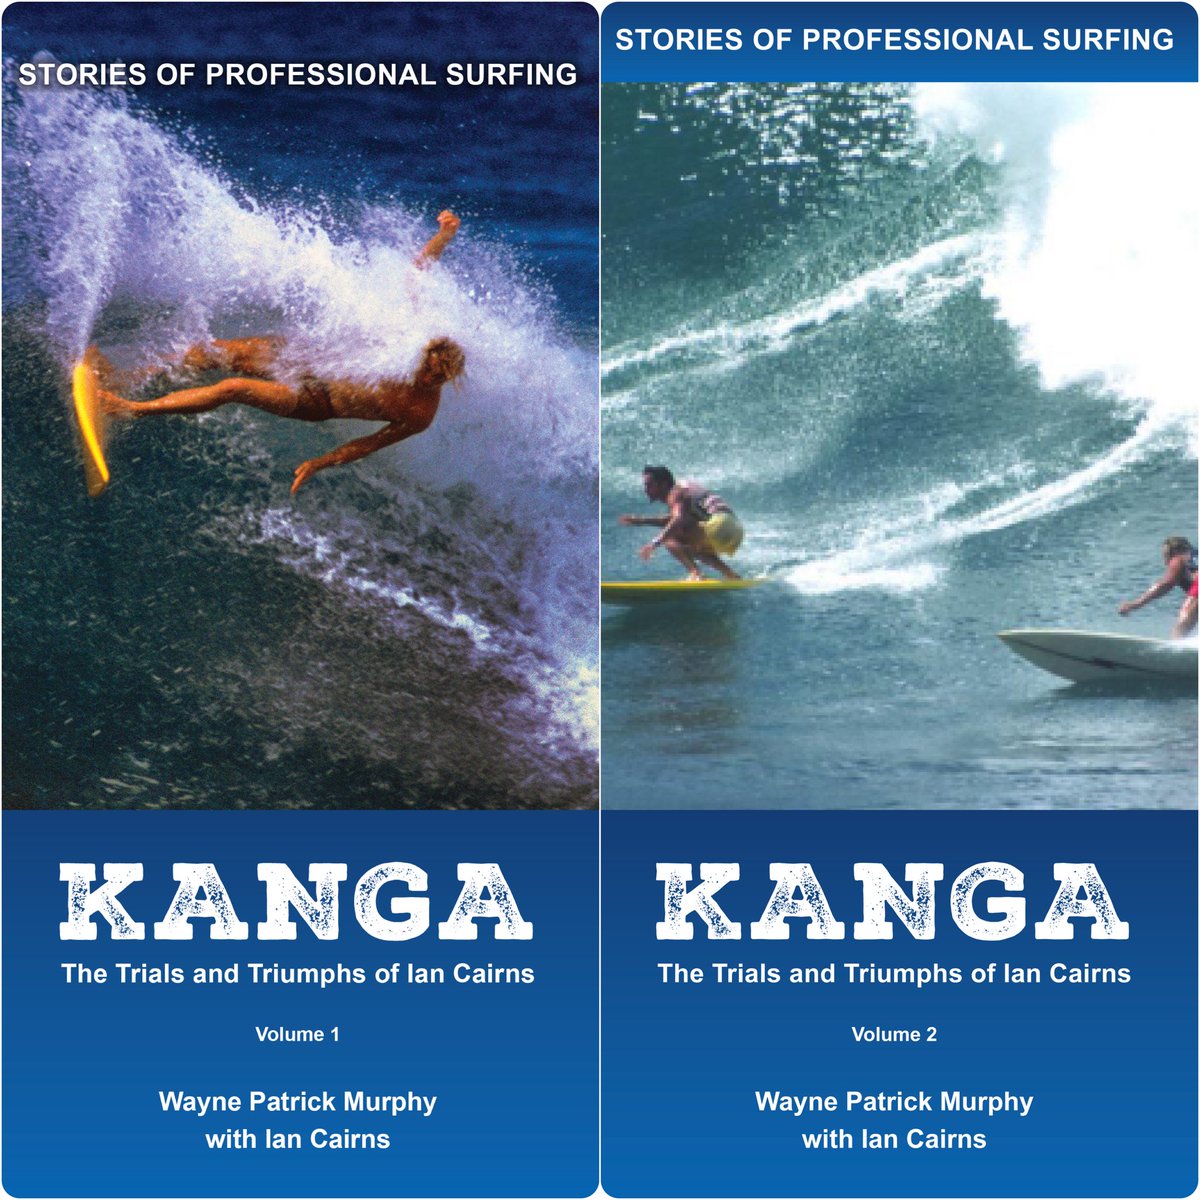 Read Surf Legends 340,000 word, two-volume, Wild Tell-All! picture